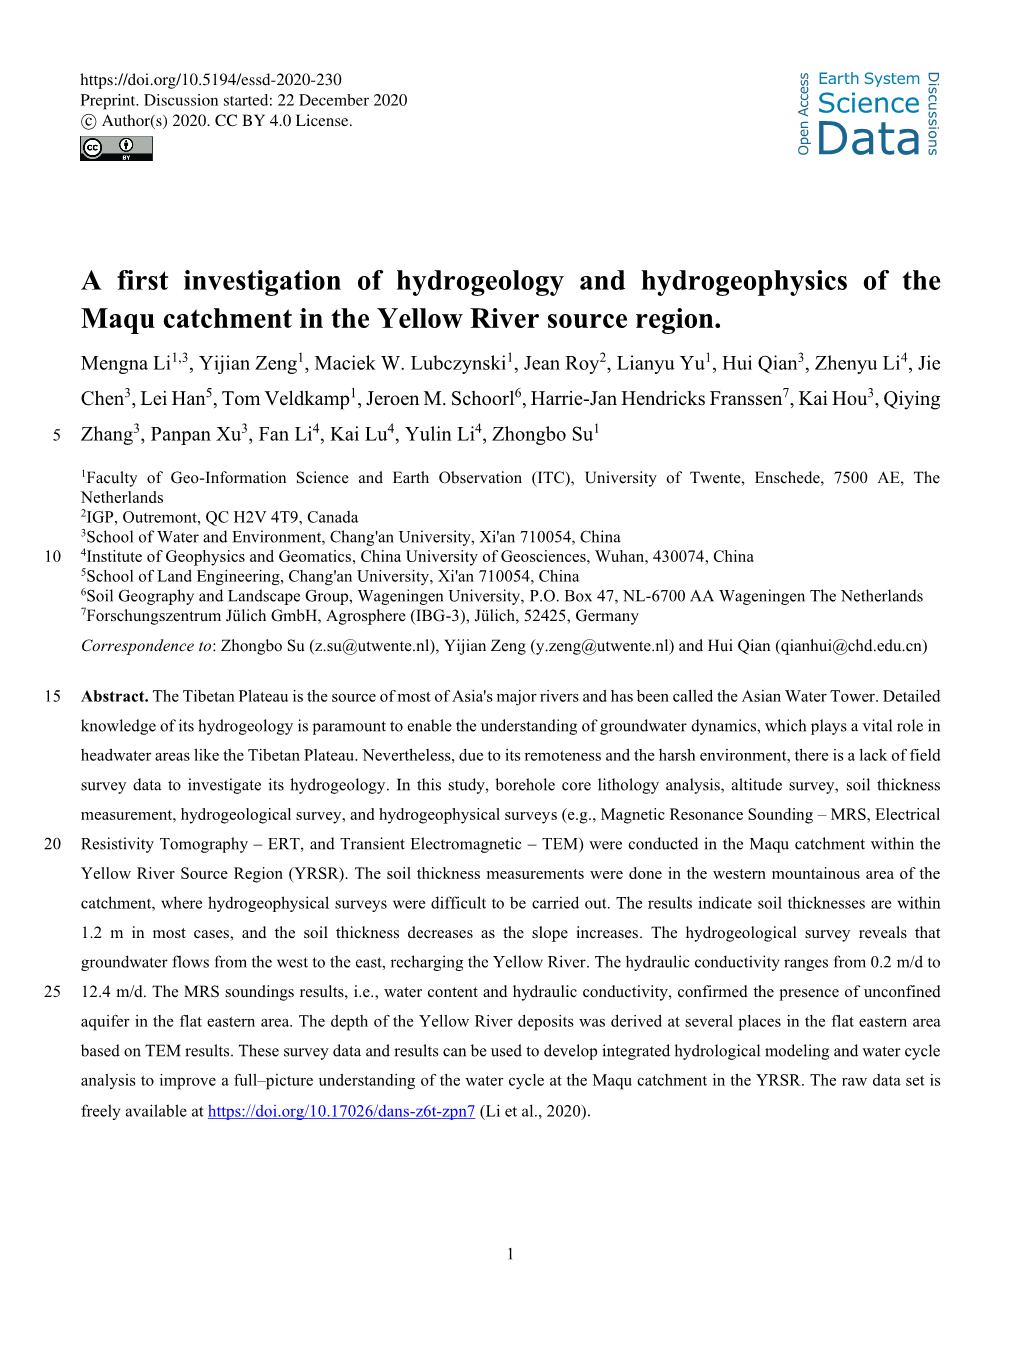 A First Investigation of Hydrogeology and Hydrogeophysics of the Maqu Catchment in the Yellow River Source Region